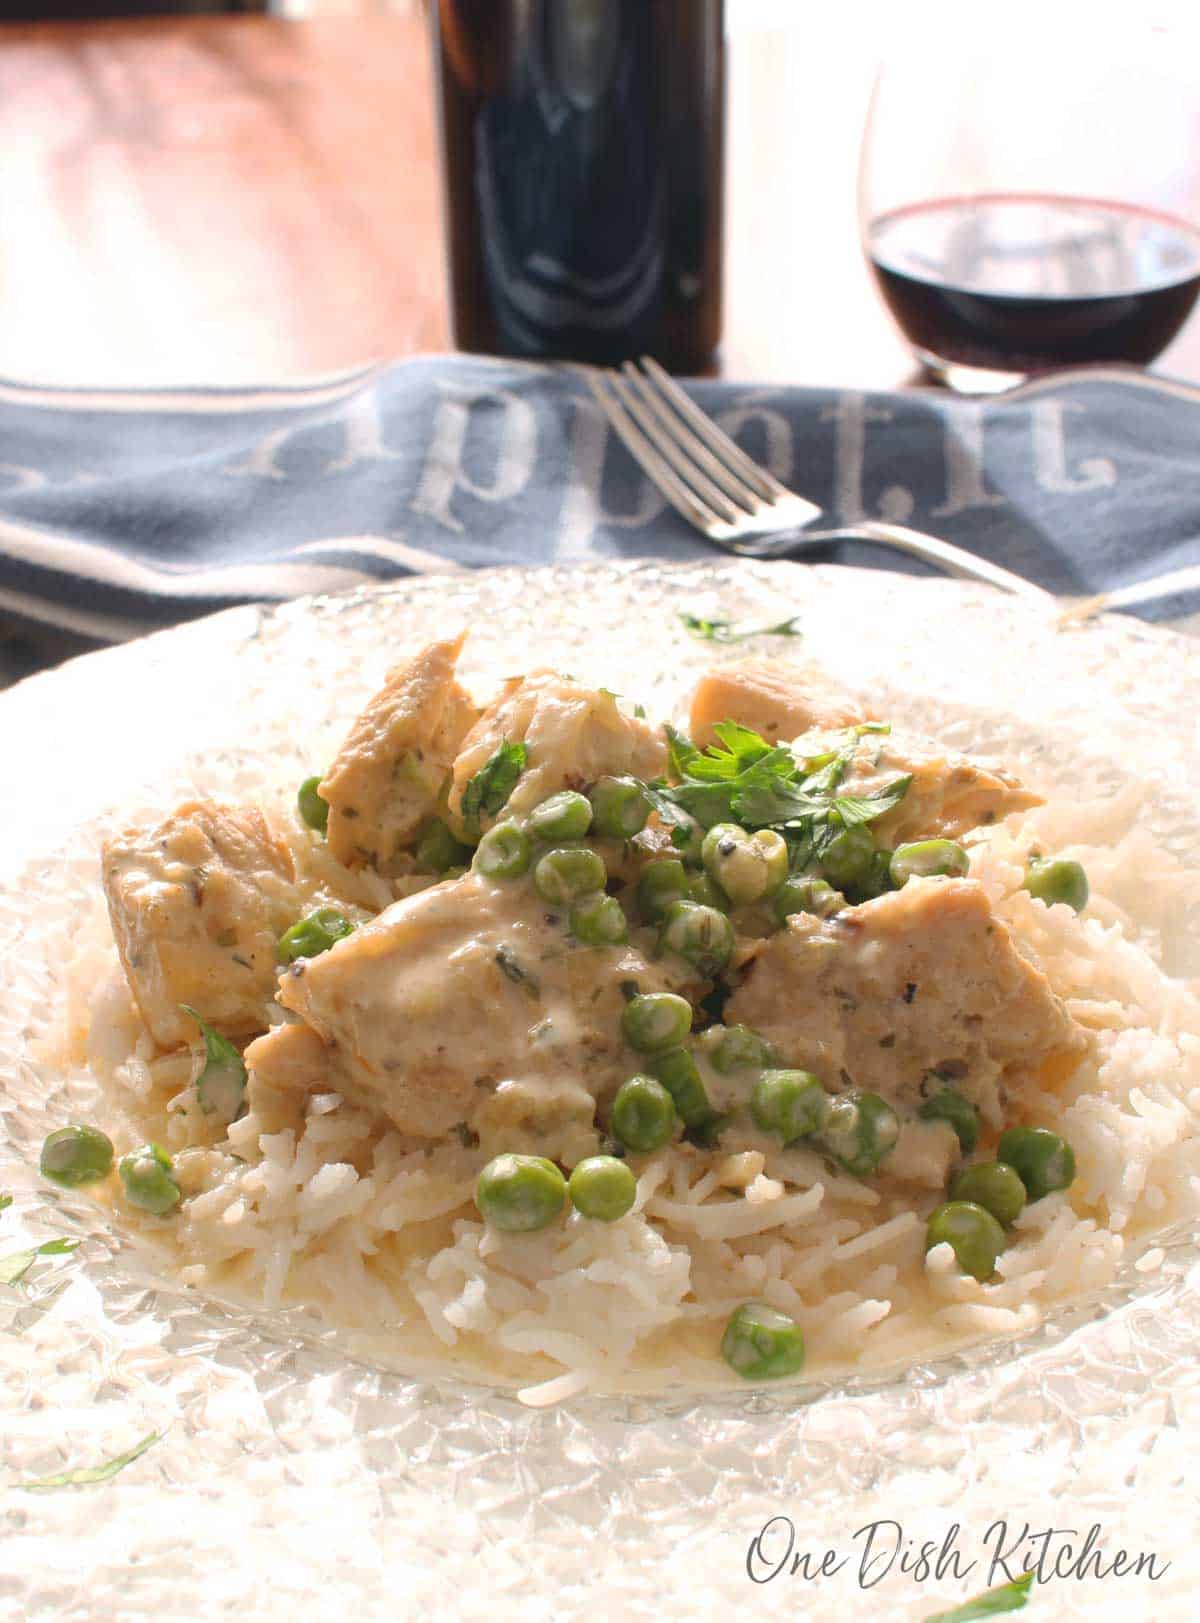 Chicken fricassee served over white rice on a clear glass plate with a blue cloth napkin and a glass of red wine in the background 